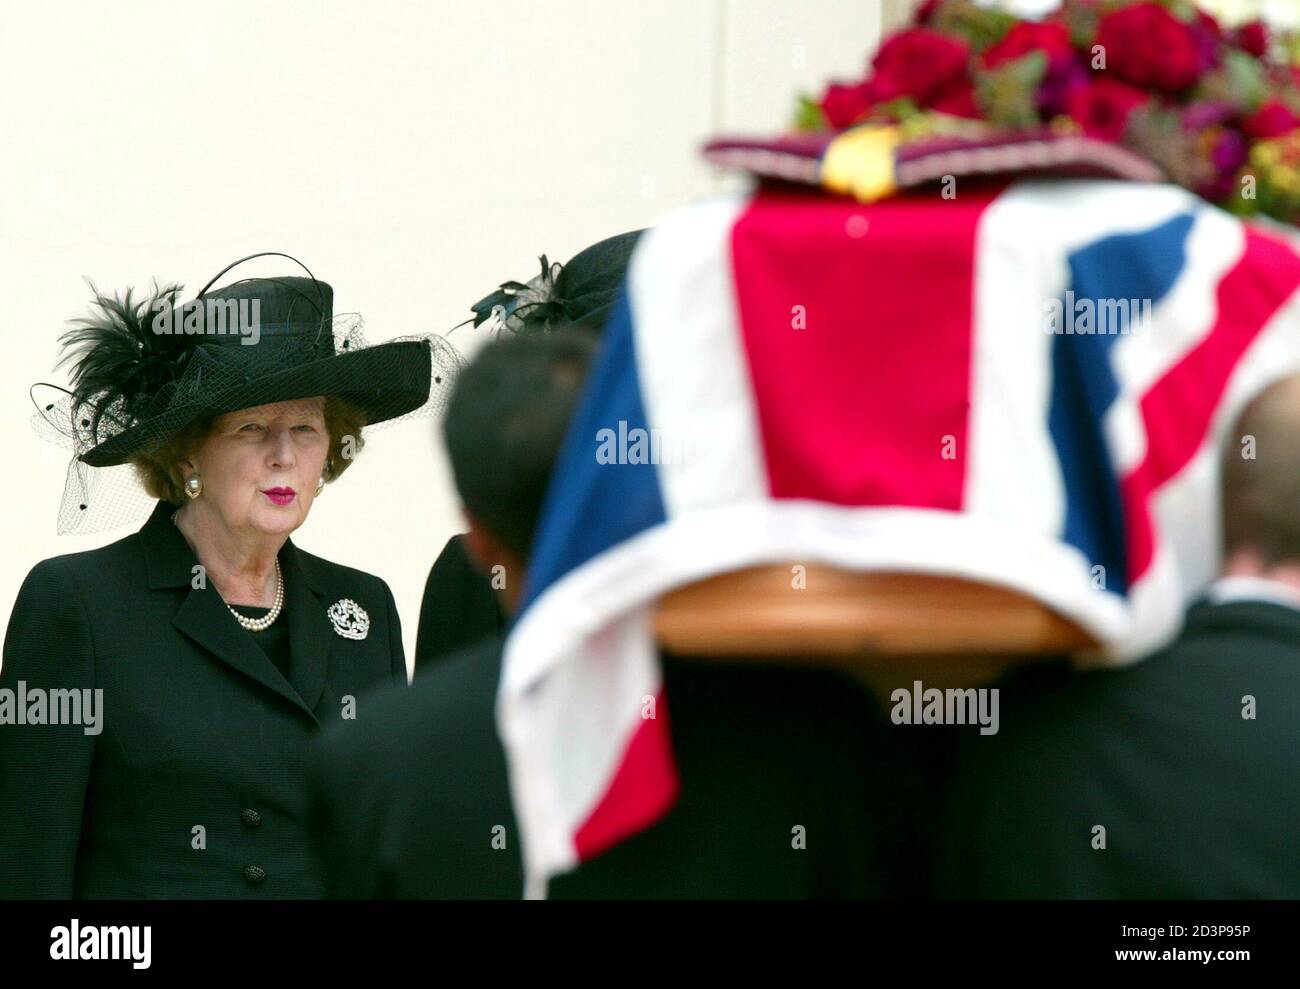 Margaret Thatcher Denis Thatcher Who High Resolution Stock Photography And Images Alamy